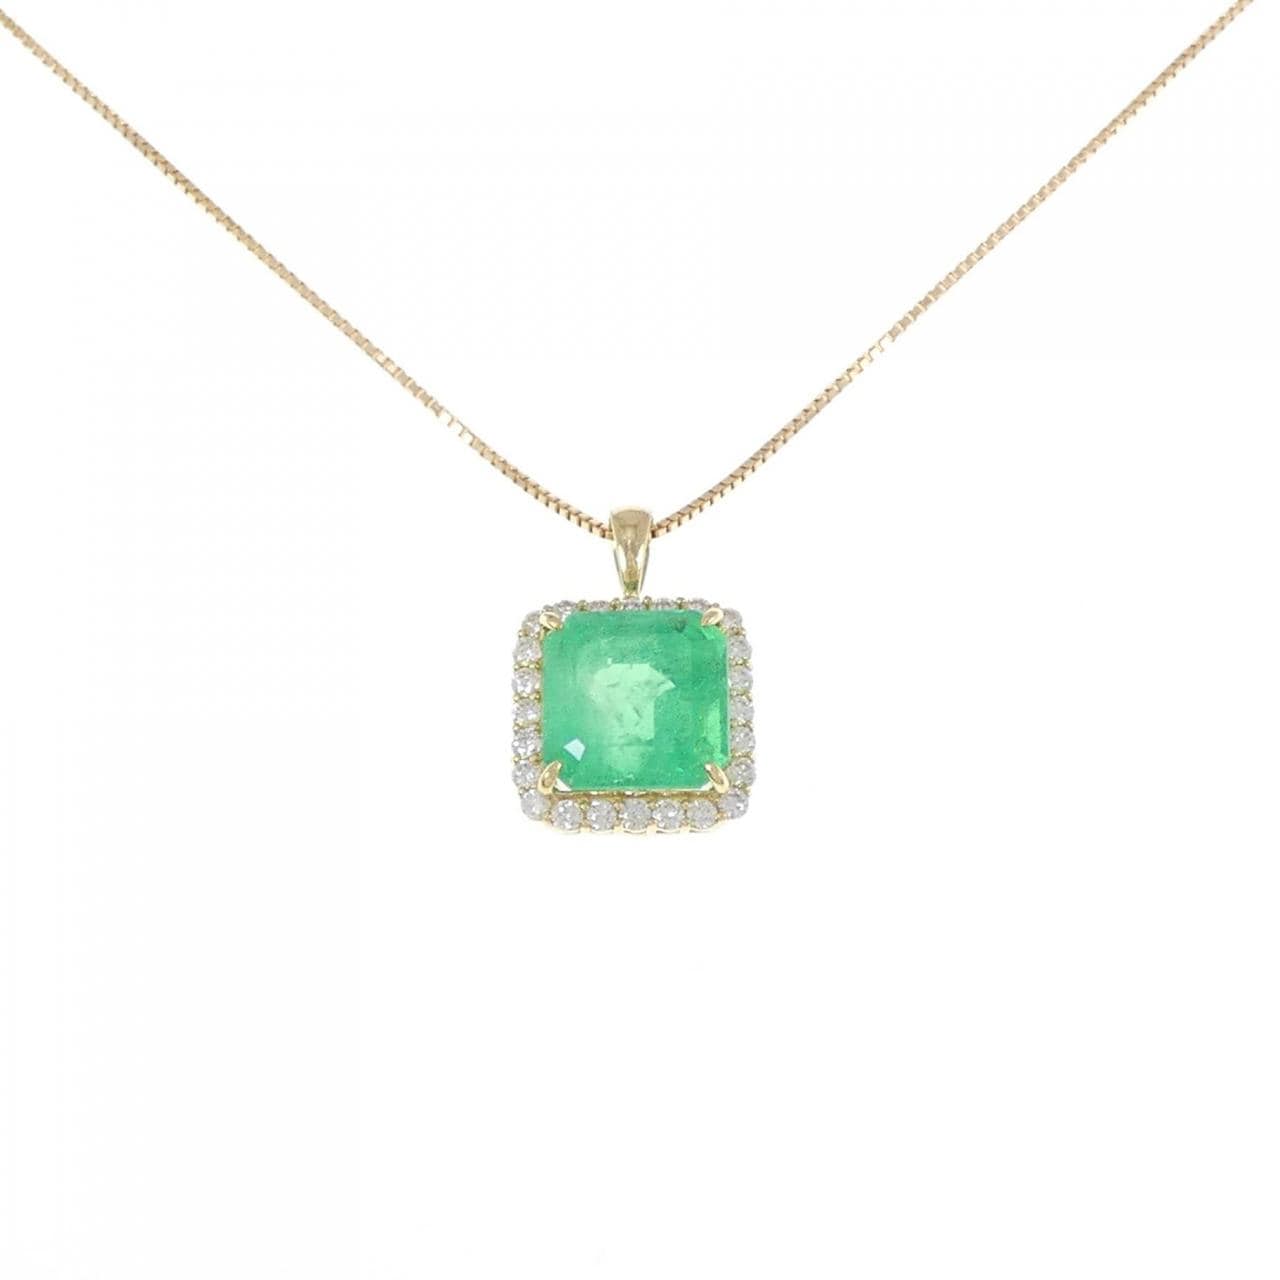 [Remake] K18YG emerald necklace 10.41CT Made in Colombia